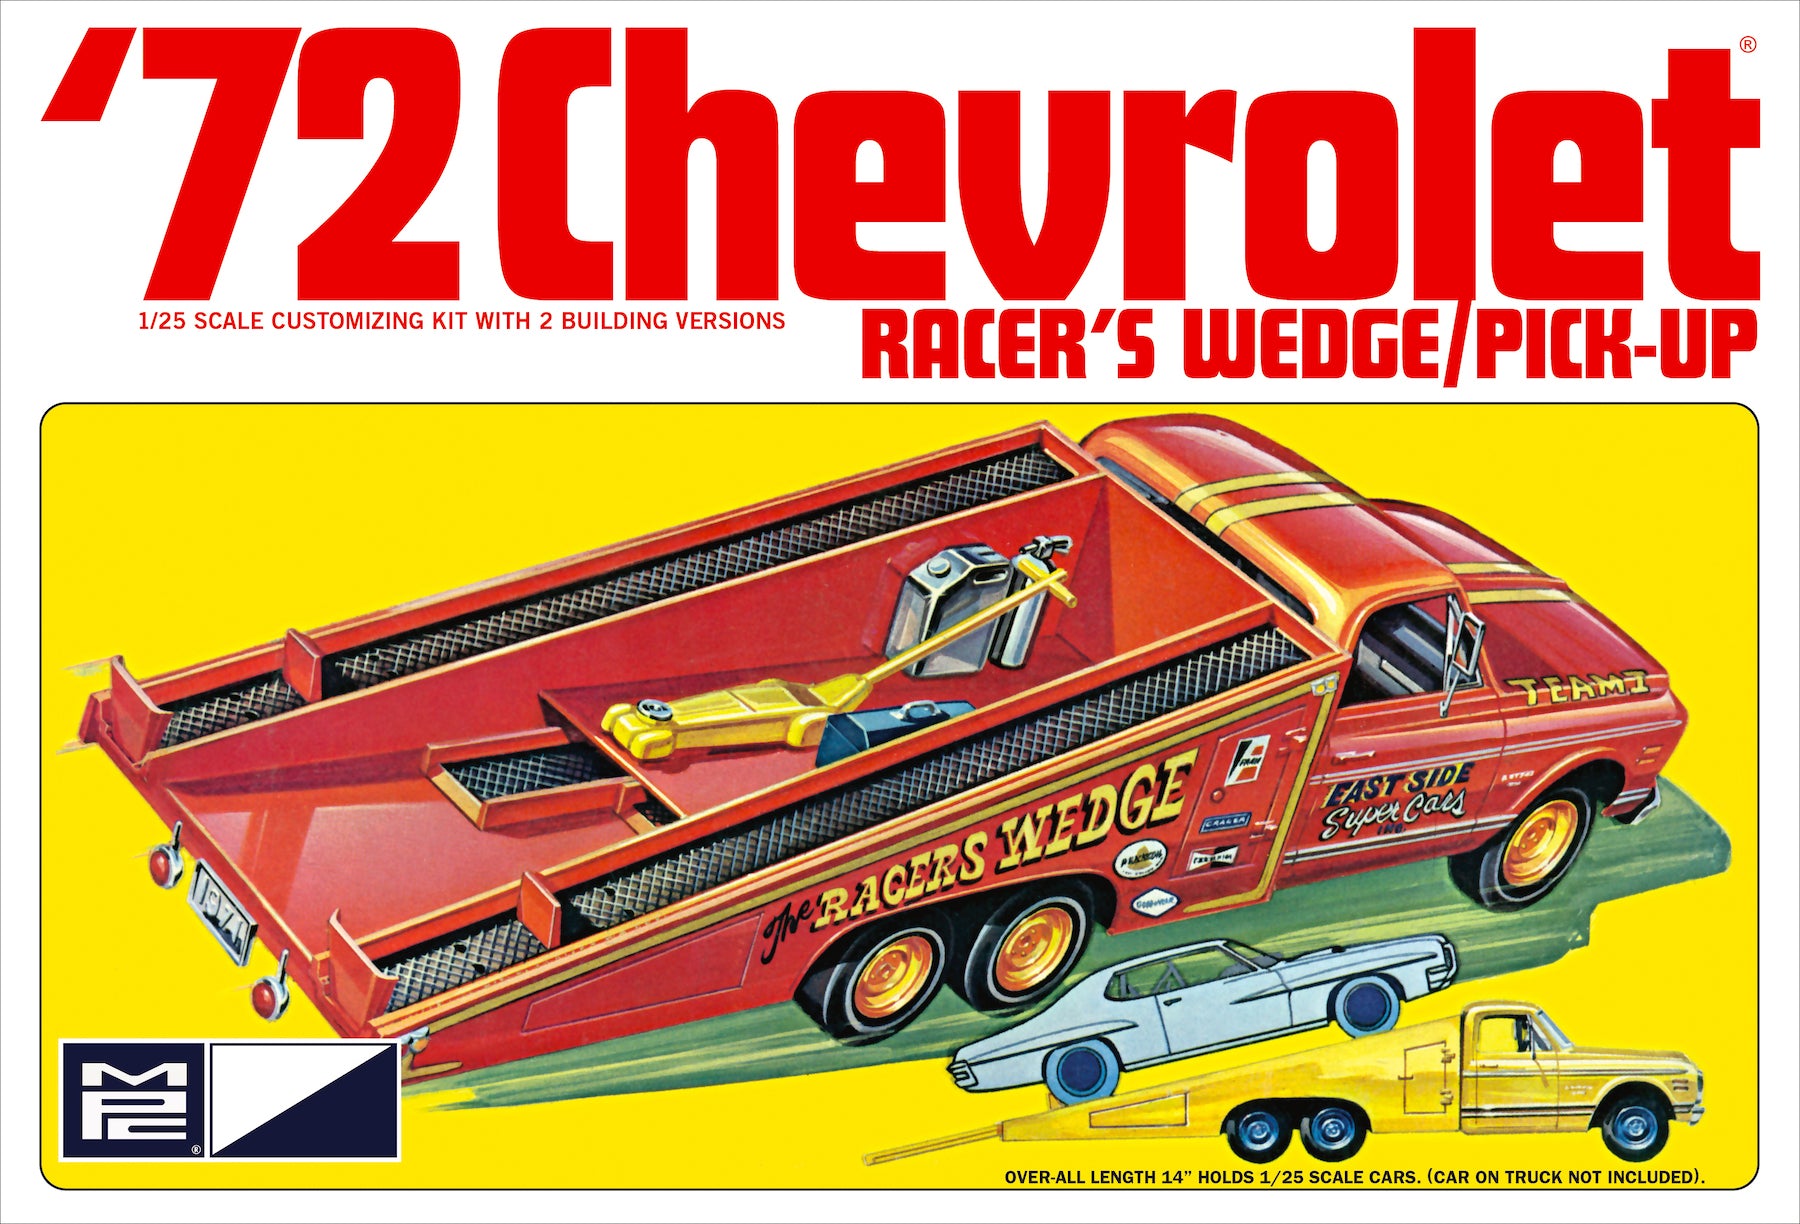 MPC 885 1972 Chevy Racer’s Wedge Pick Up 1/25 Scale Model Kit